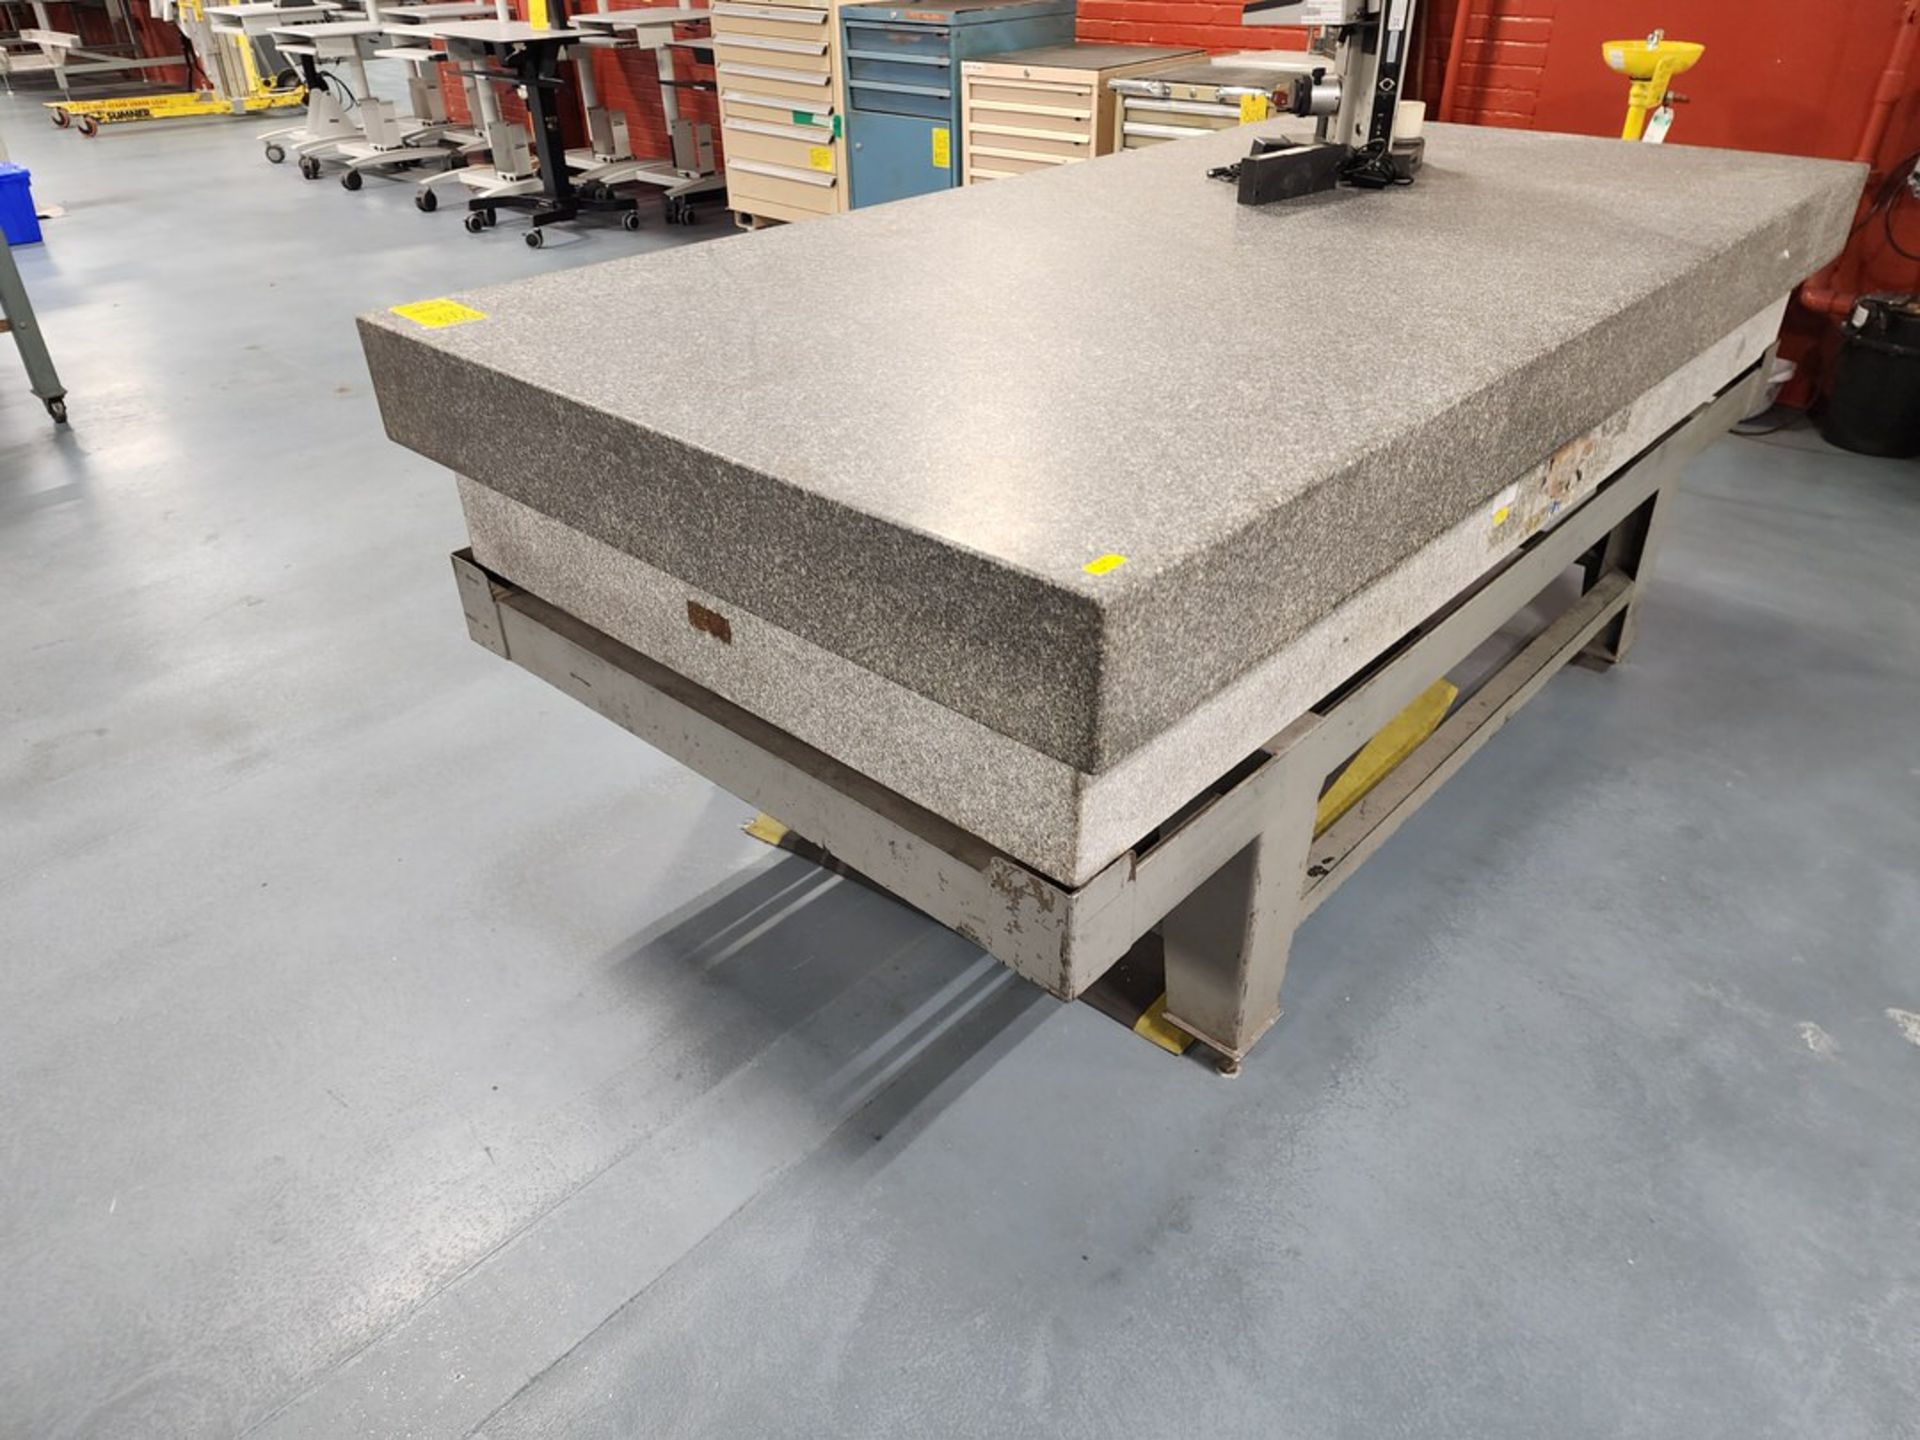 Surface Granite Plate W/ Stand 96"x48" - Image 4 of 4